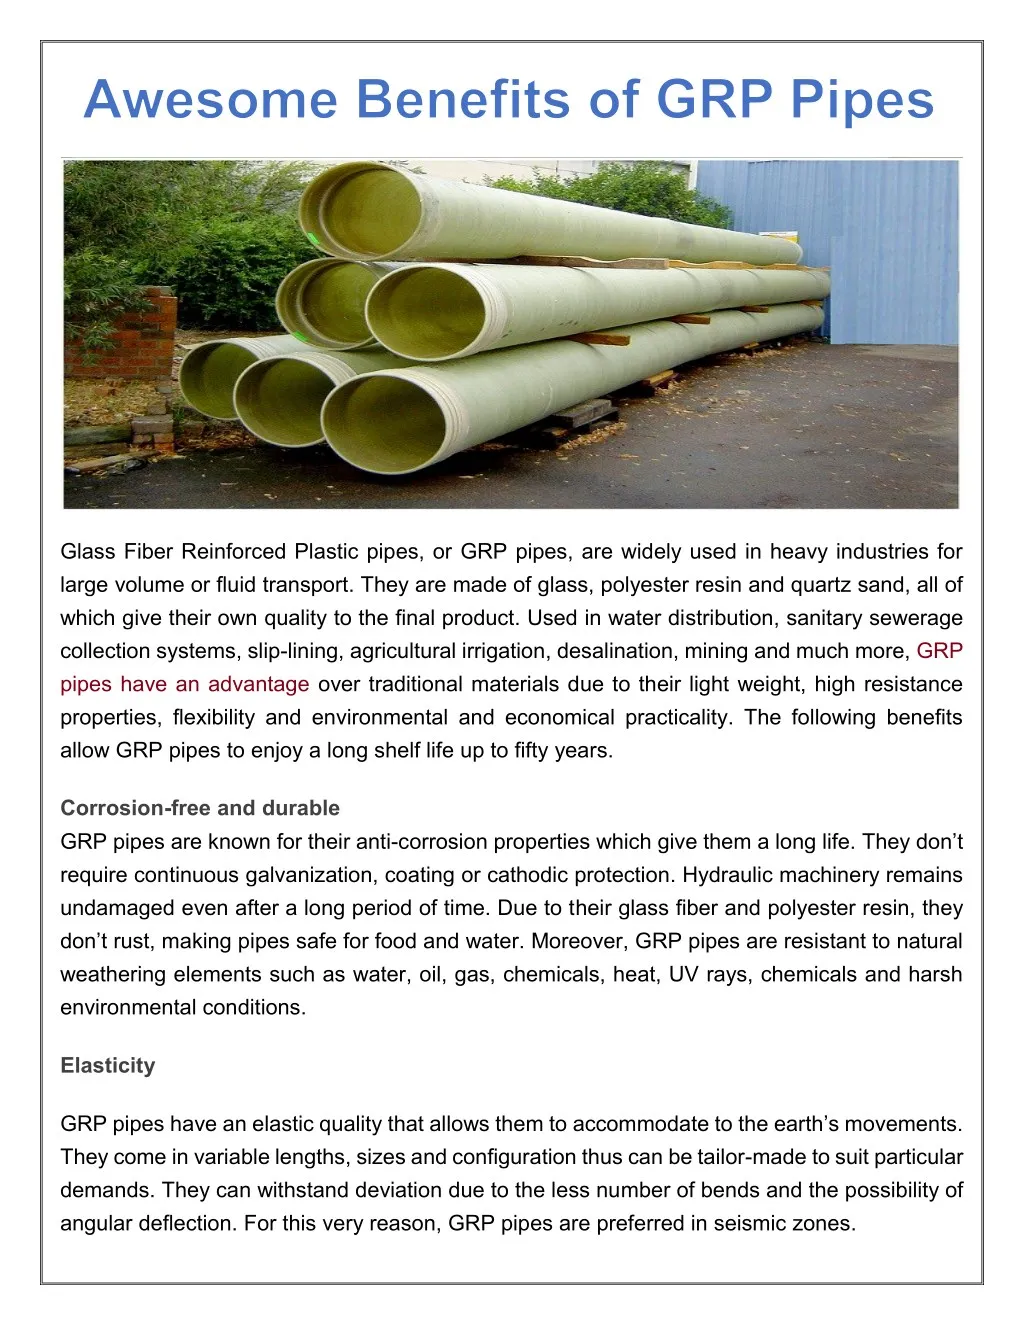 glass fiber reinforced plastic pipes or grp pipes